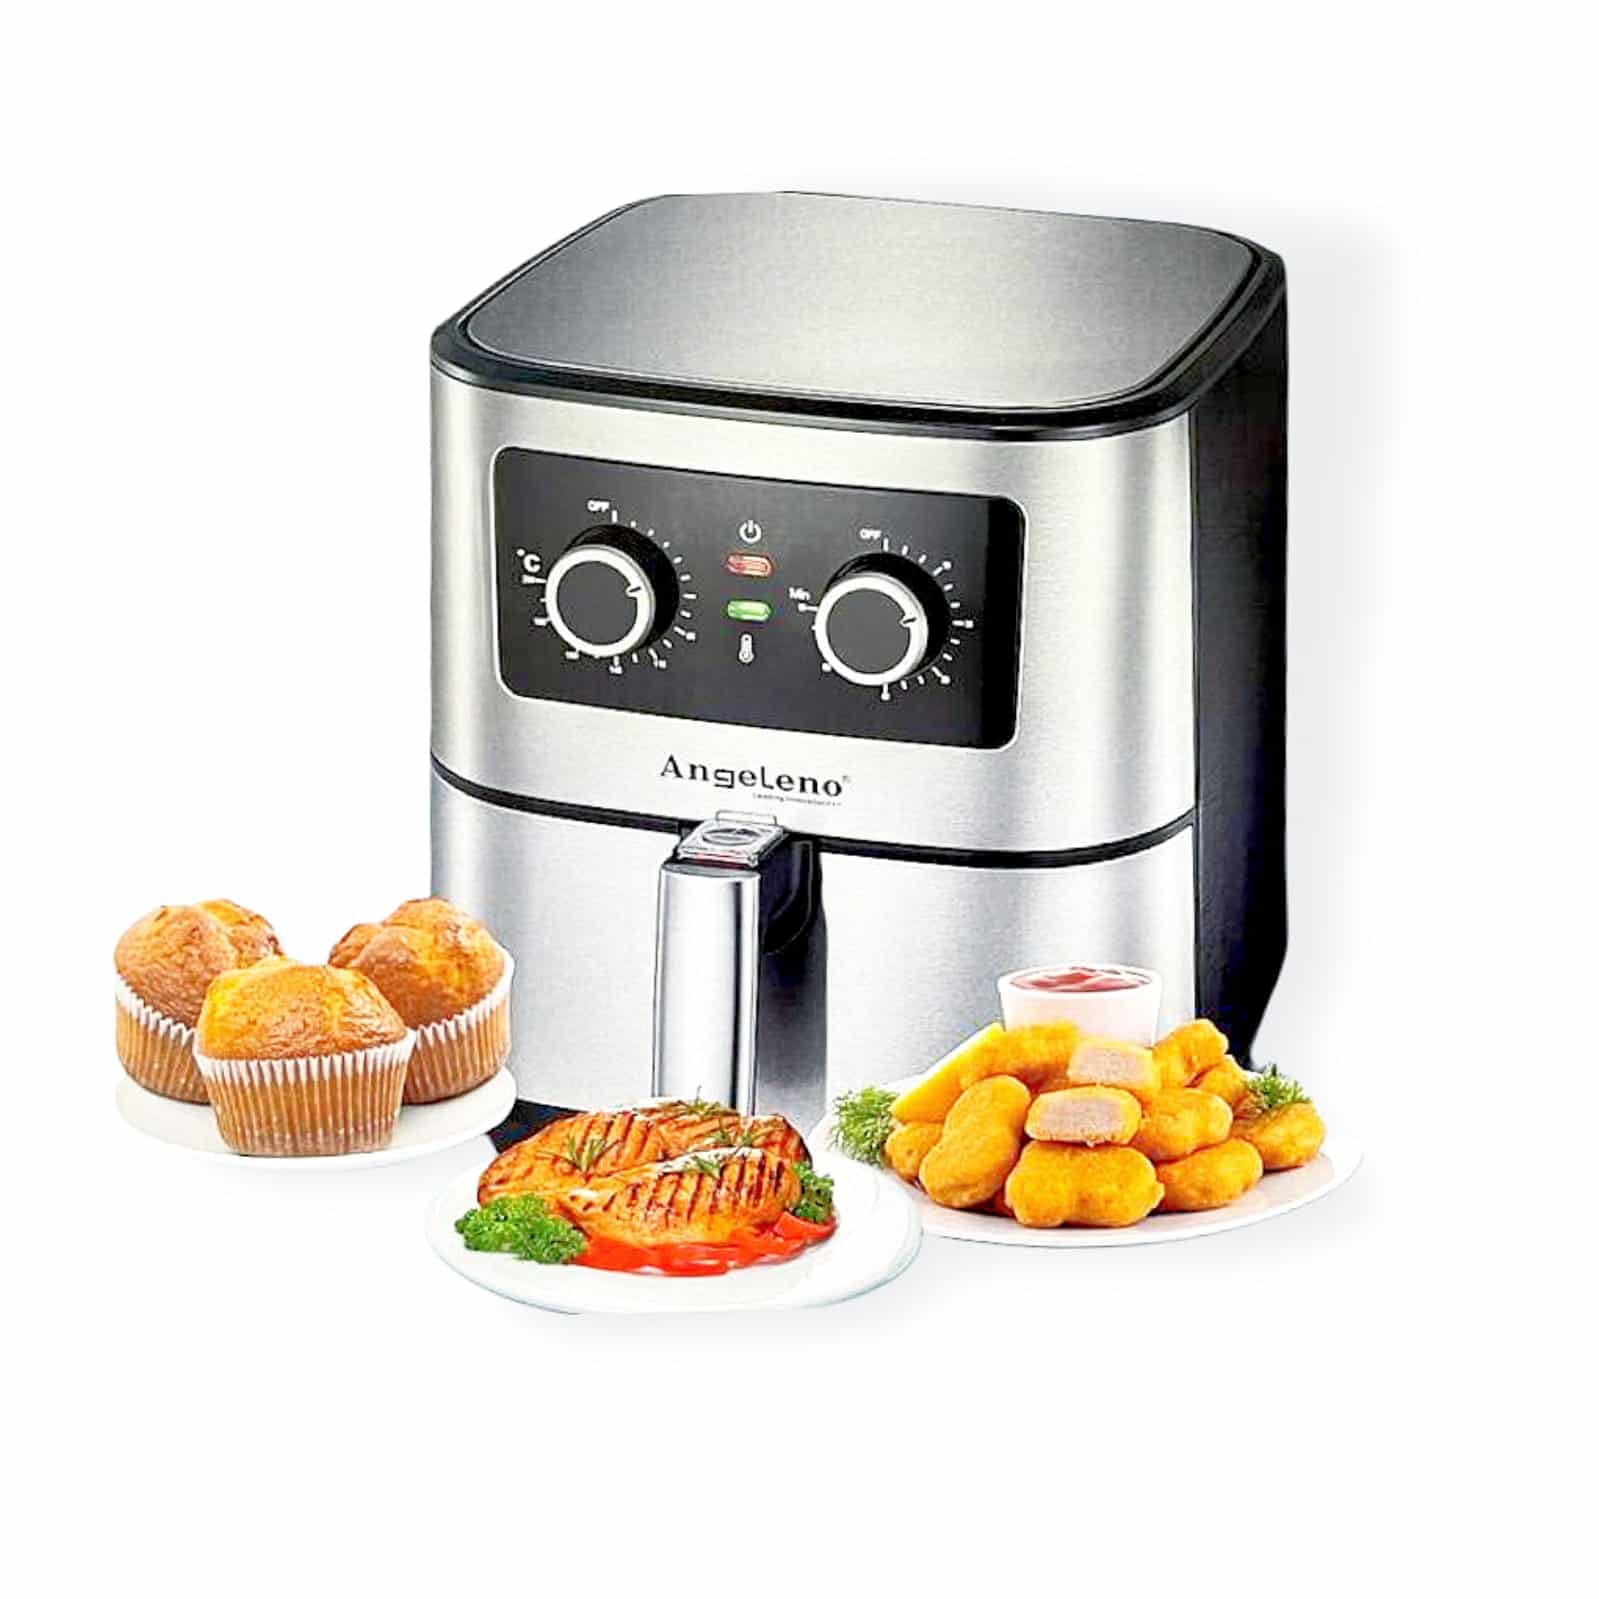 Angeleno G300 Healthy Air Fryer with Large Capacity 5.5 Literv